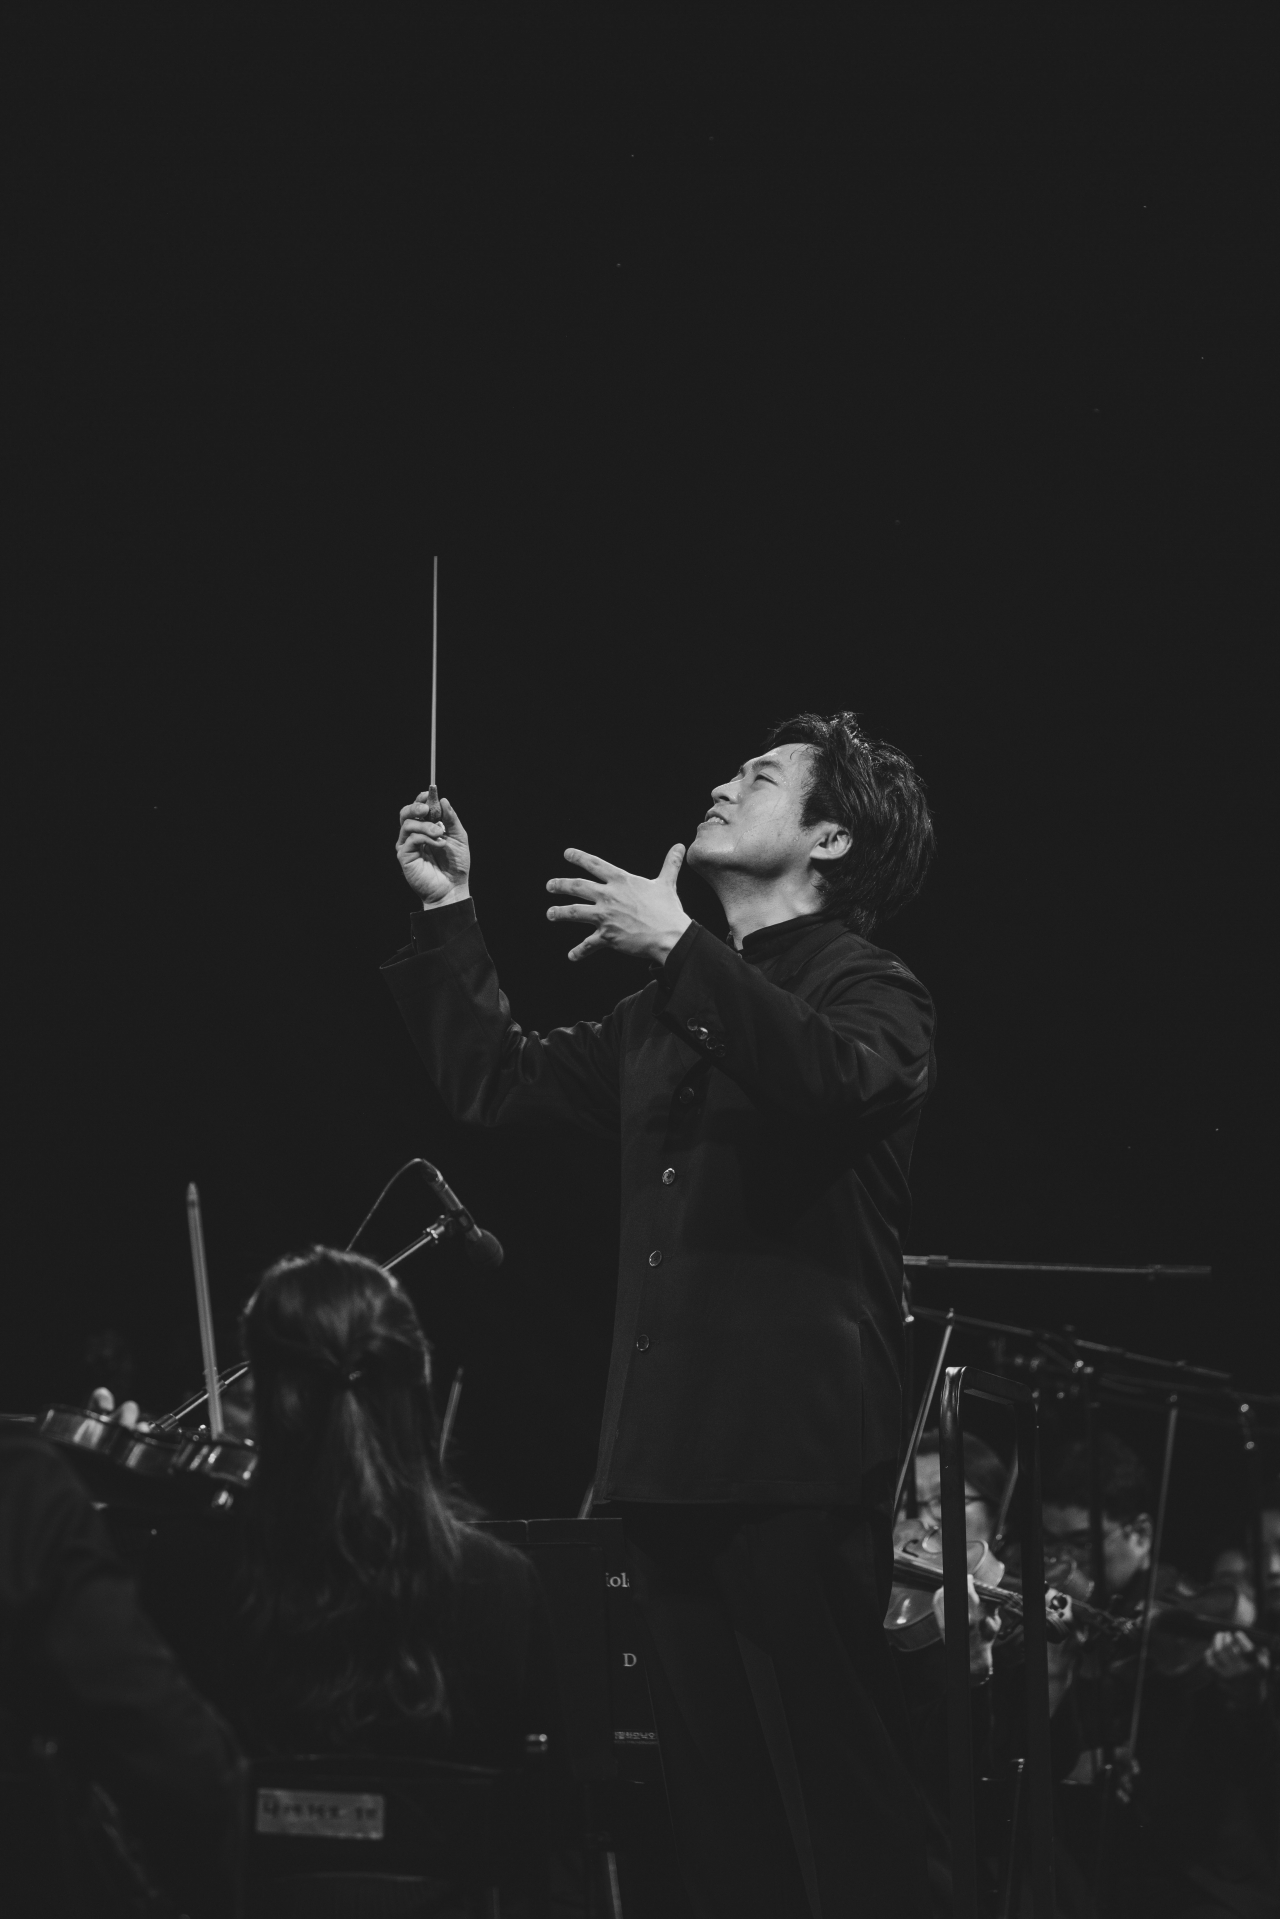 Gyeonggi Philharmonic Orchestra artistic director Kim Sun-wook leads the orchestra at the 10th Gyechon Classic Festival on Sunday. (Chung Mong-koo Foundation)